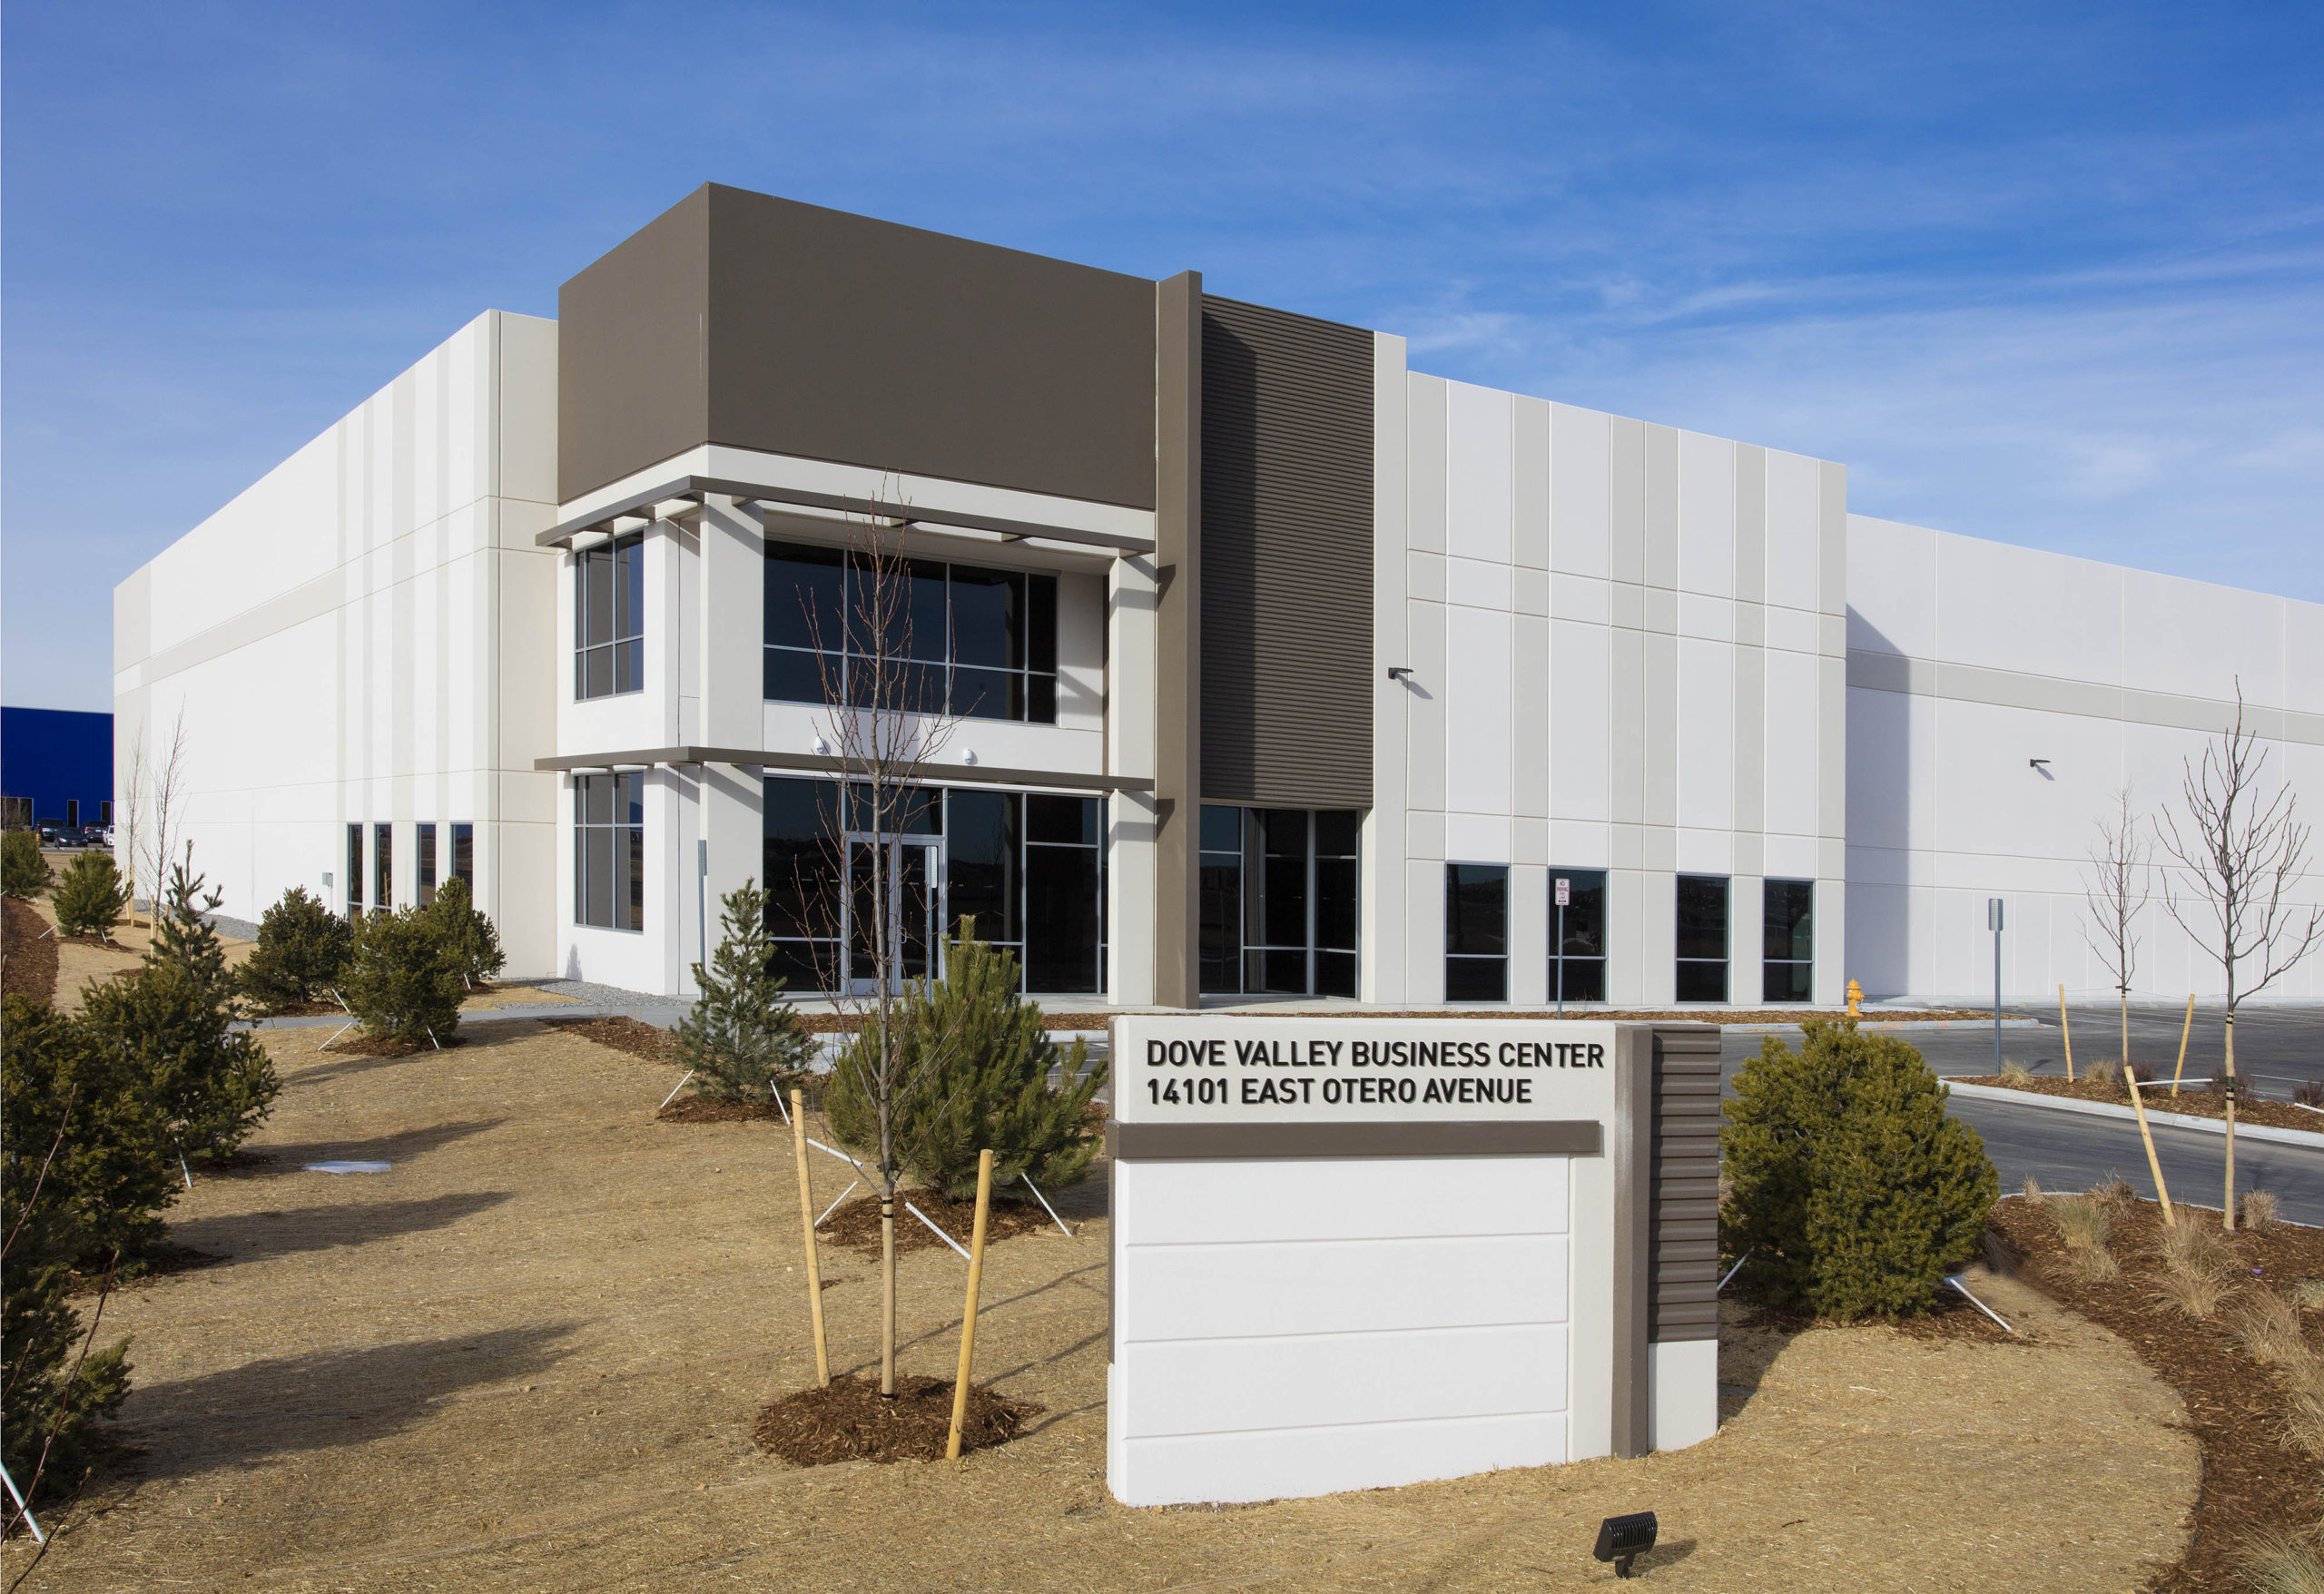 westcore-acquires-warehouse-in-englewood-colorado-for-23-million